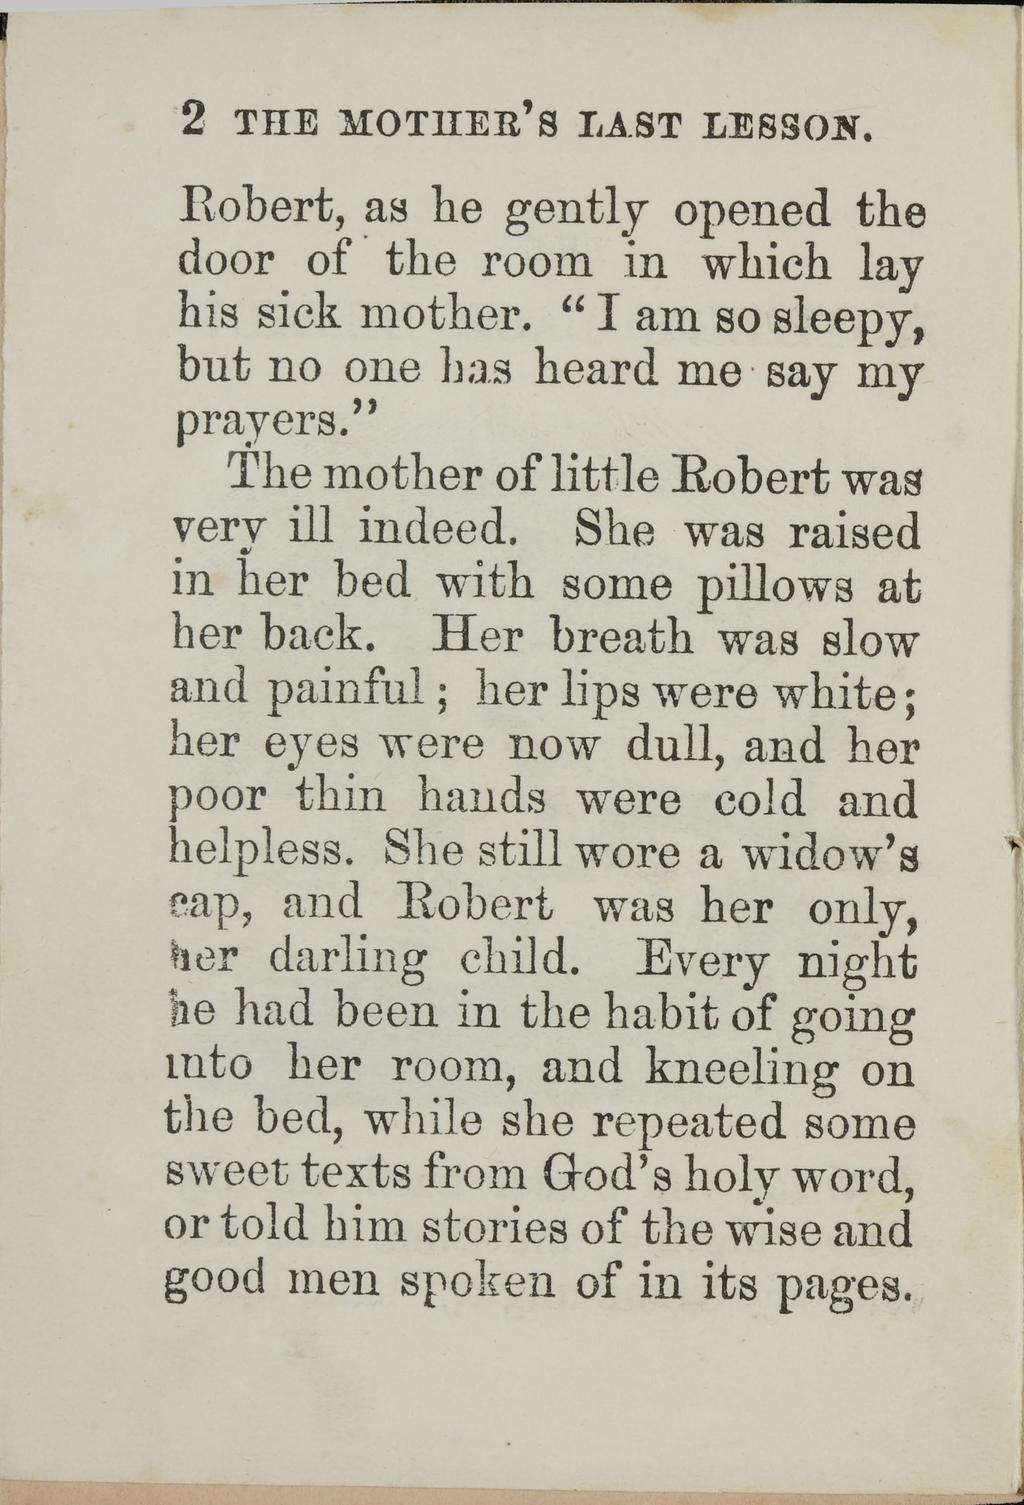 2 THEMOTHER S LASTLESSON. Robert, as he gently opened the door of the room in which lay his sick mother. I am so sleepy, but no one has heard me say my prayers.